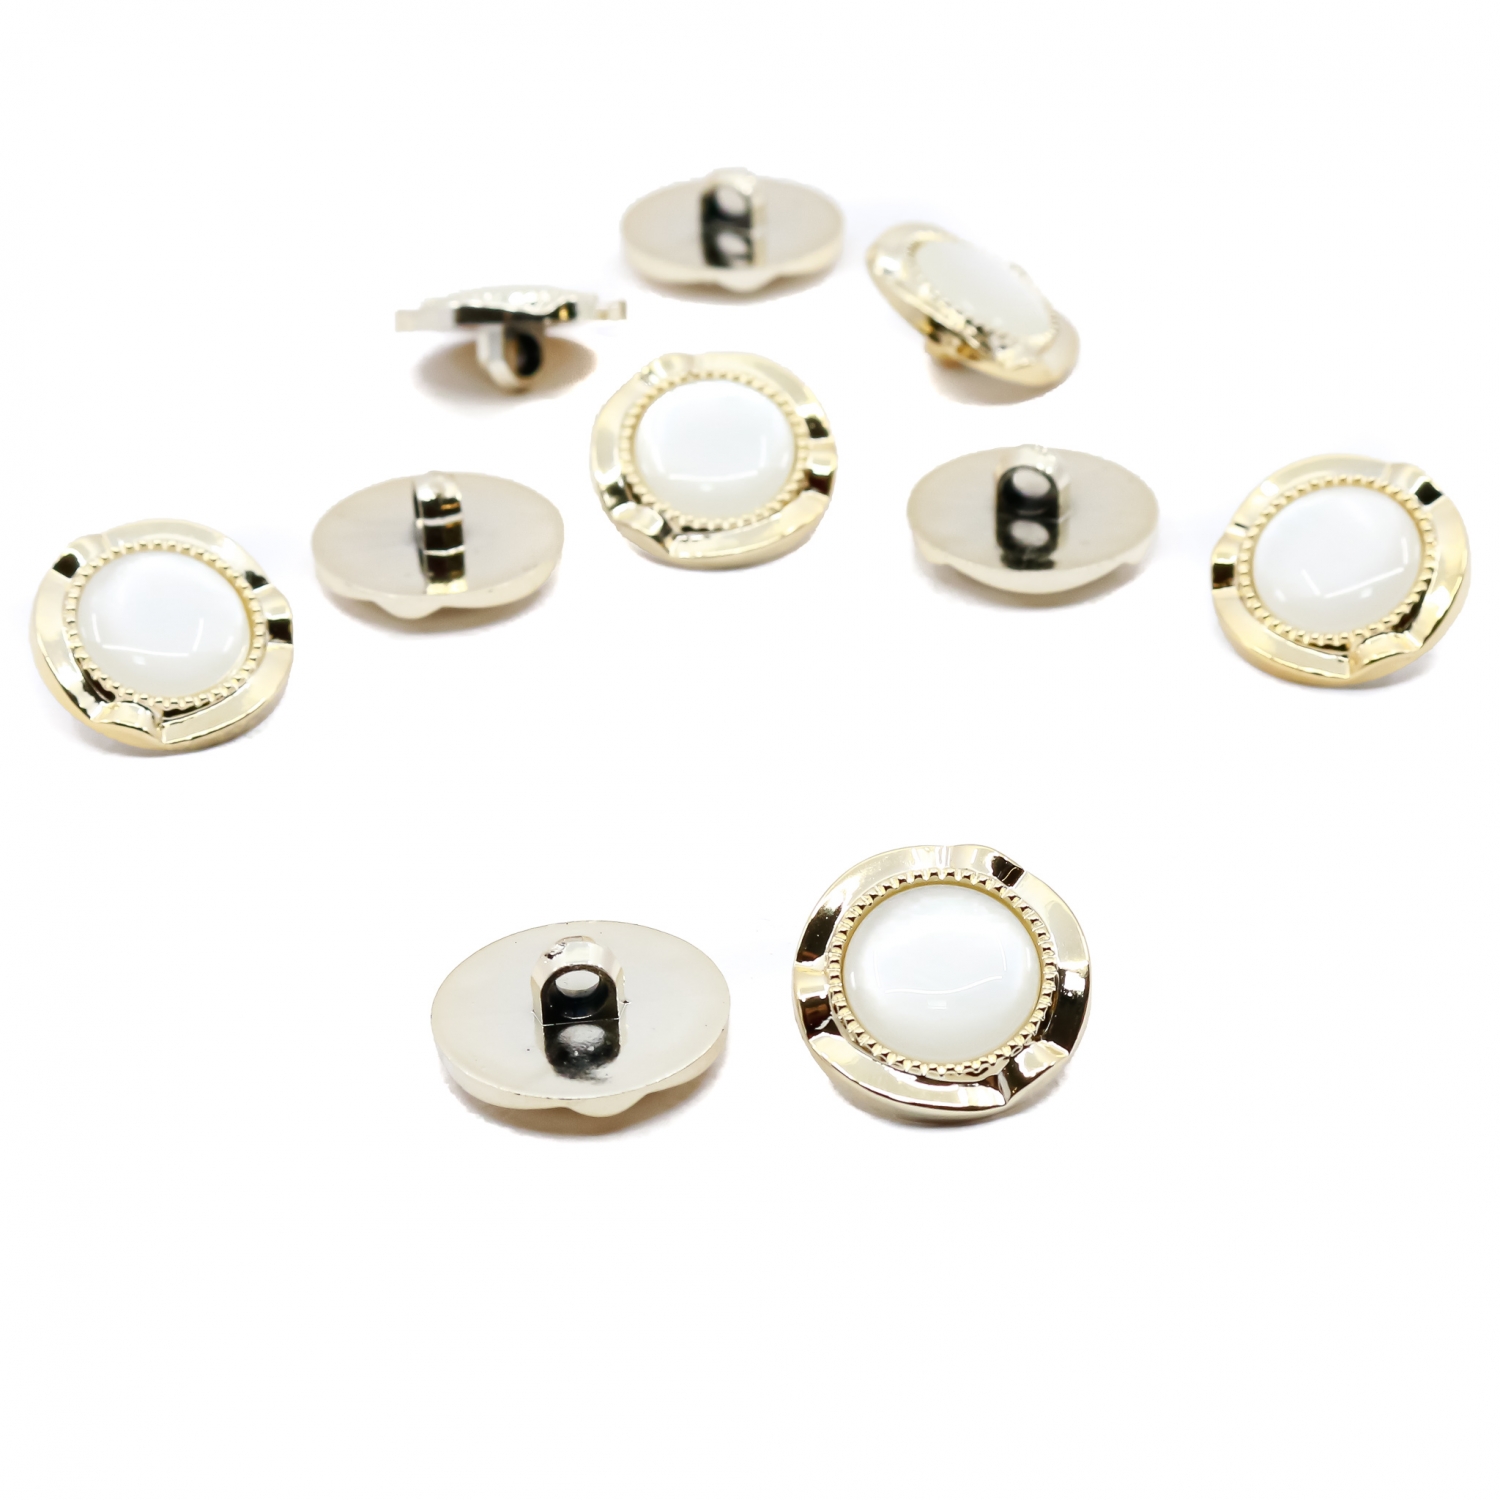 Round Shank Buttons, 18 mm (100 pcs/pack) Code: W21/28